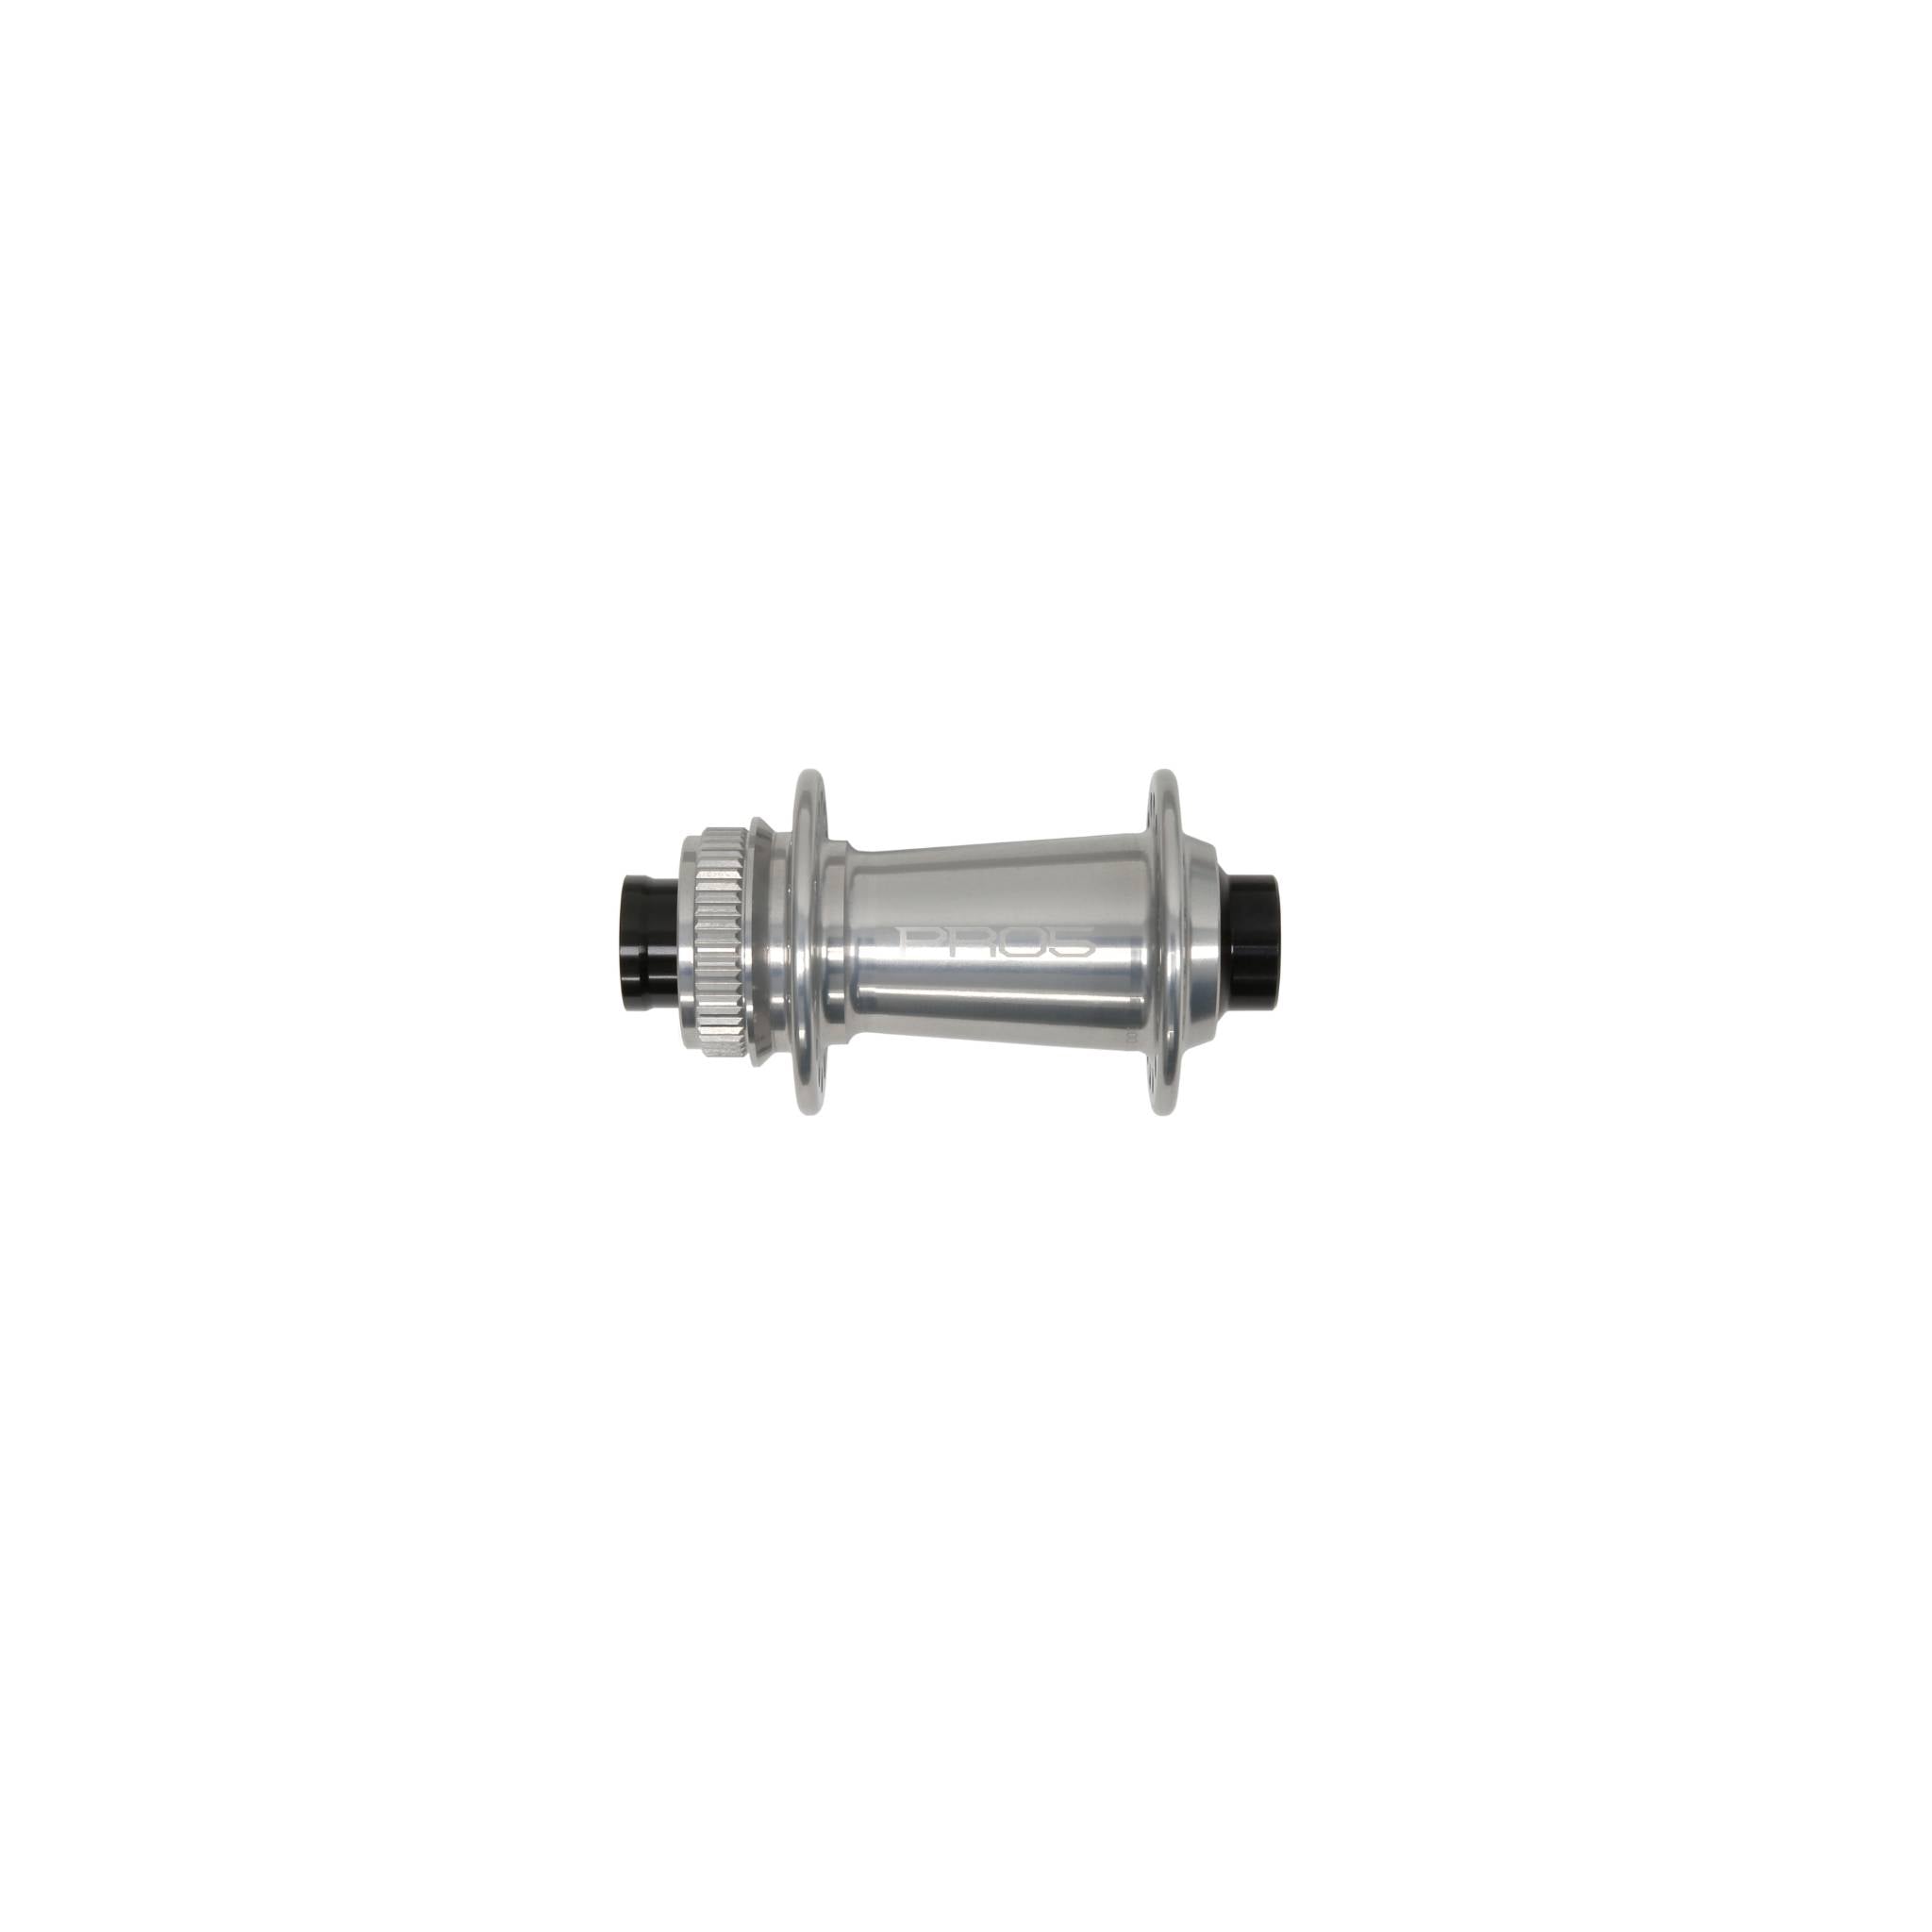 Hope Pro 5 Front Hub Centre Lock - Silver